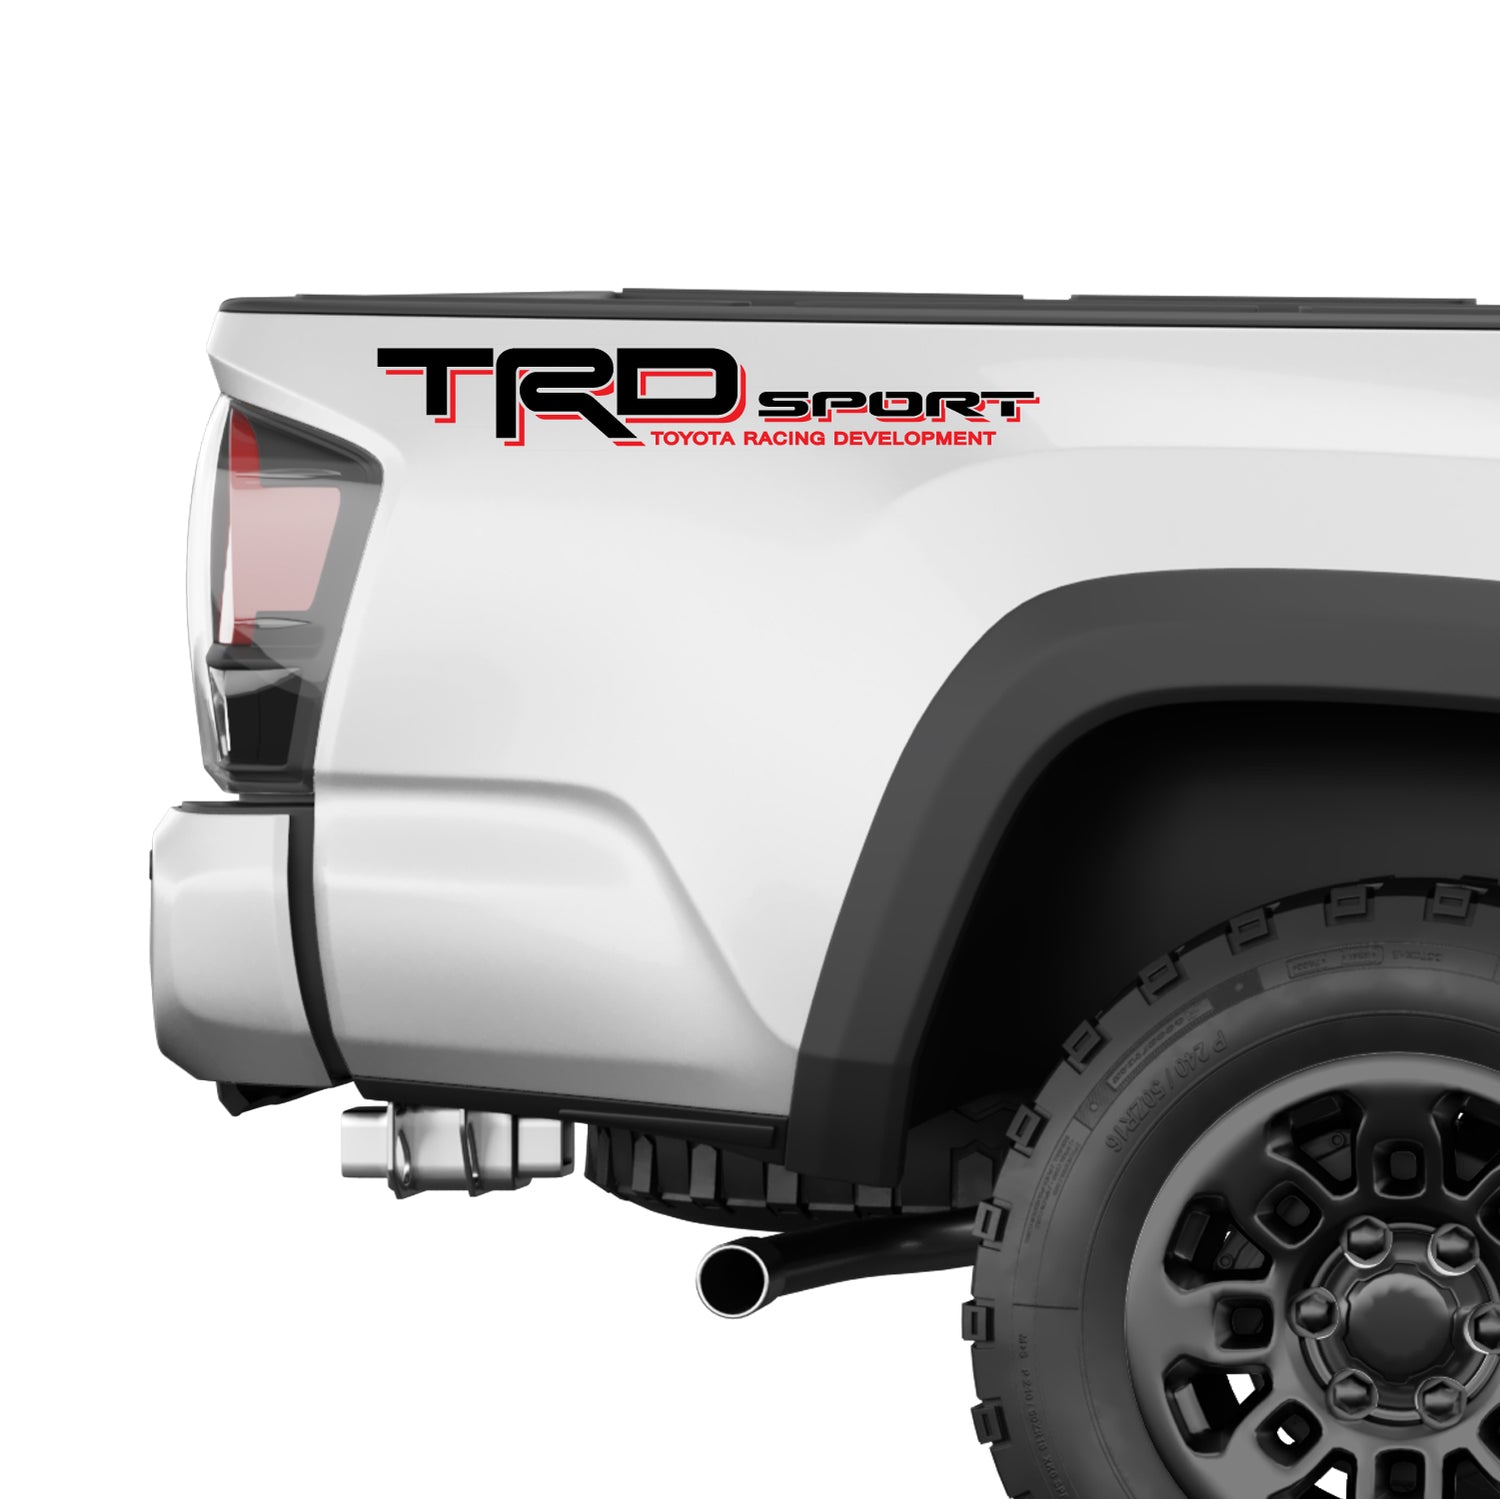 TRD Sport Decals for Tacoma, Racing Development Sticker | Black-Red - TiresFX